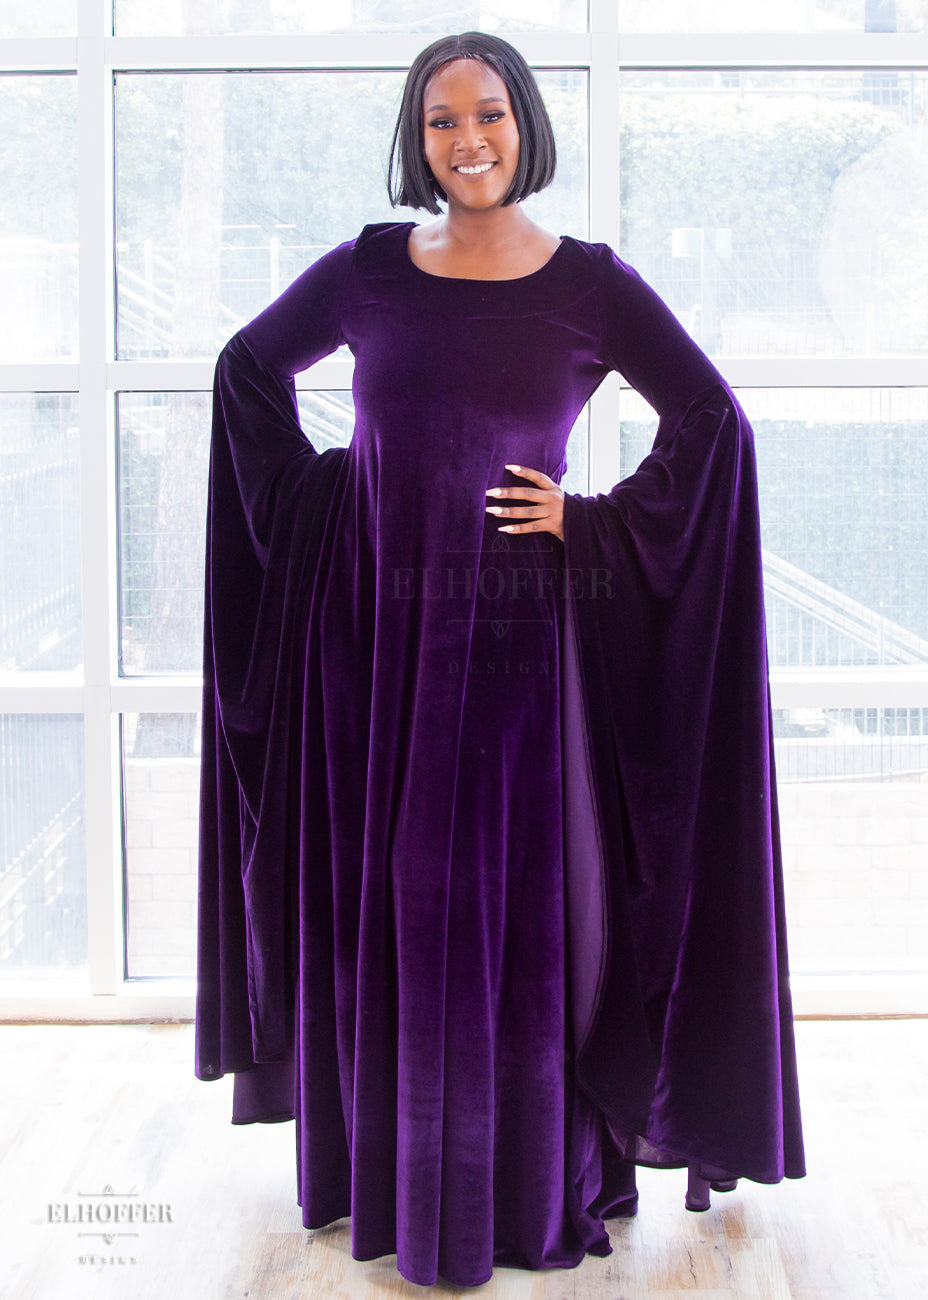 Lynsi (a medium dark skinned size large model with short dark hair) wears the purple velvet floor length dress. It has a boatneck neckline and extra long flowing sleeves that fall to ankle length.